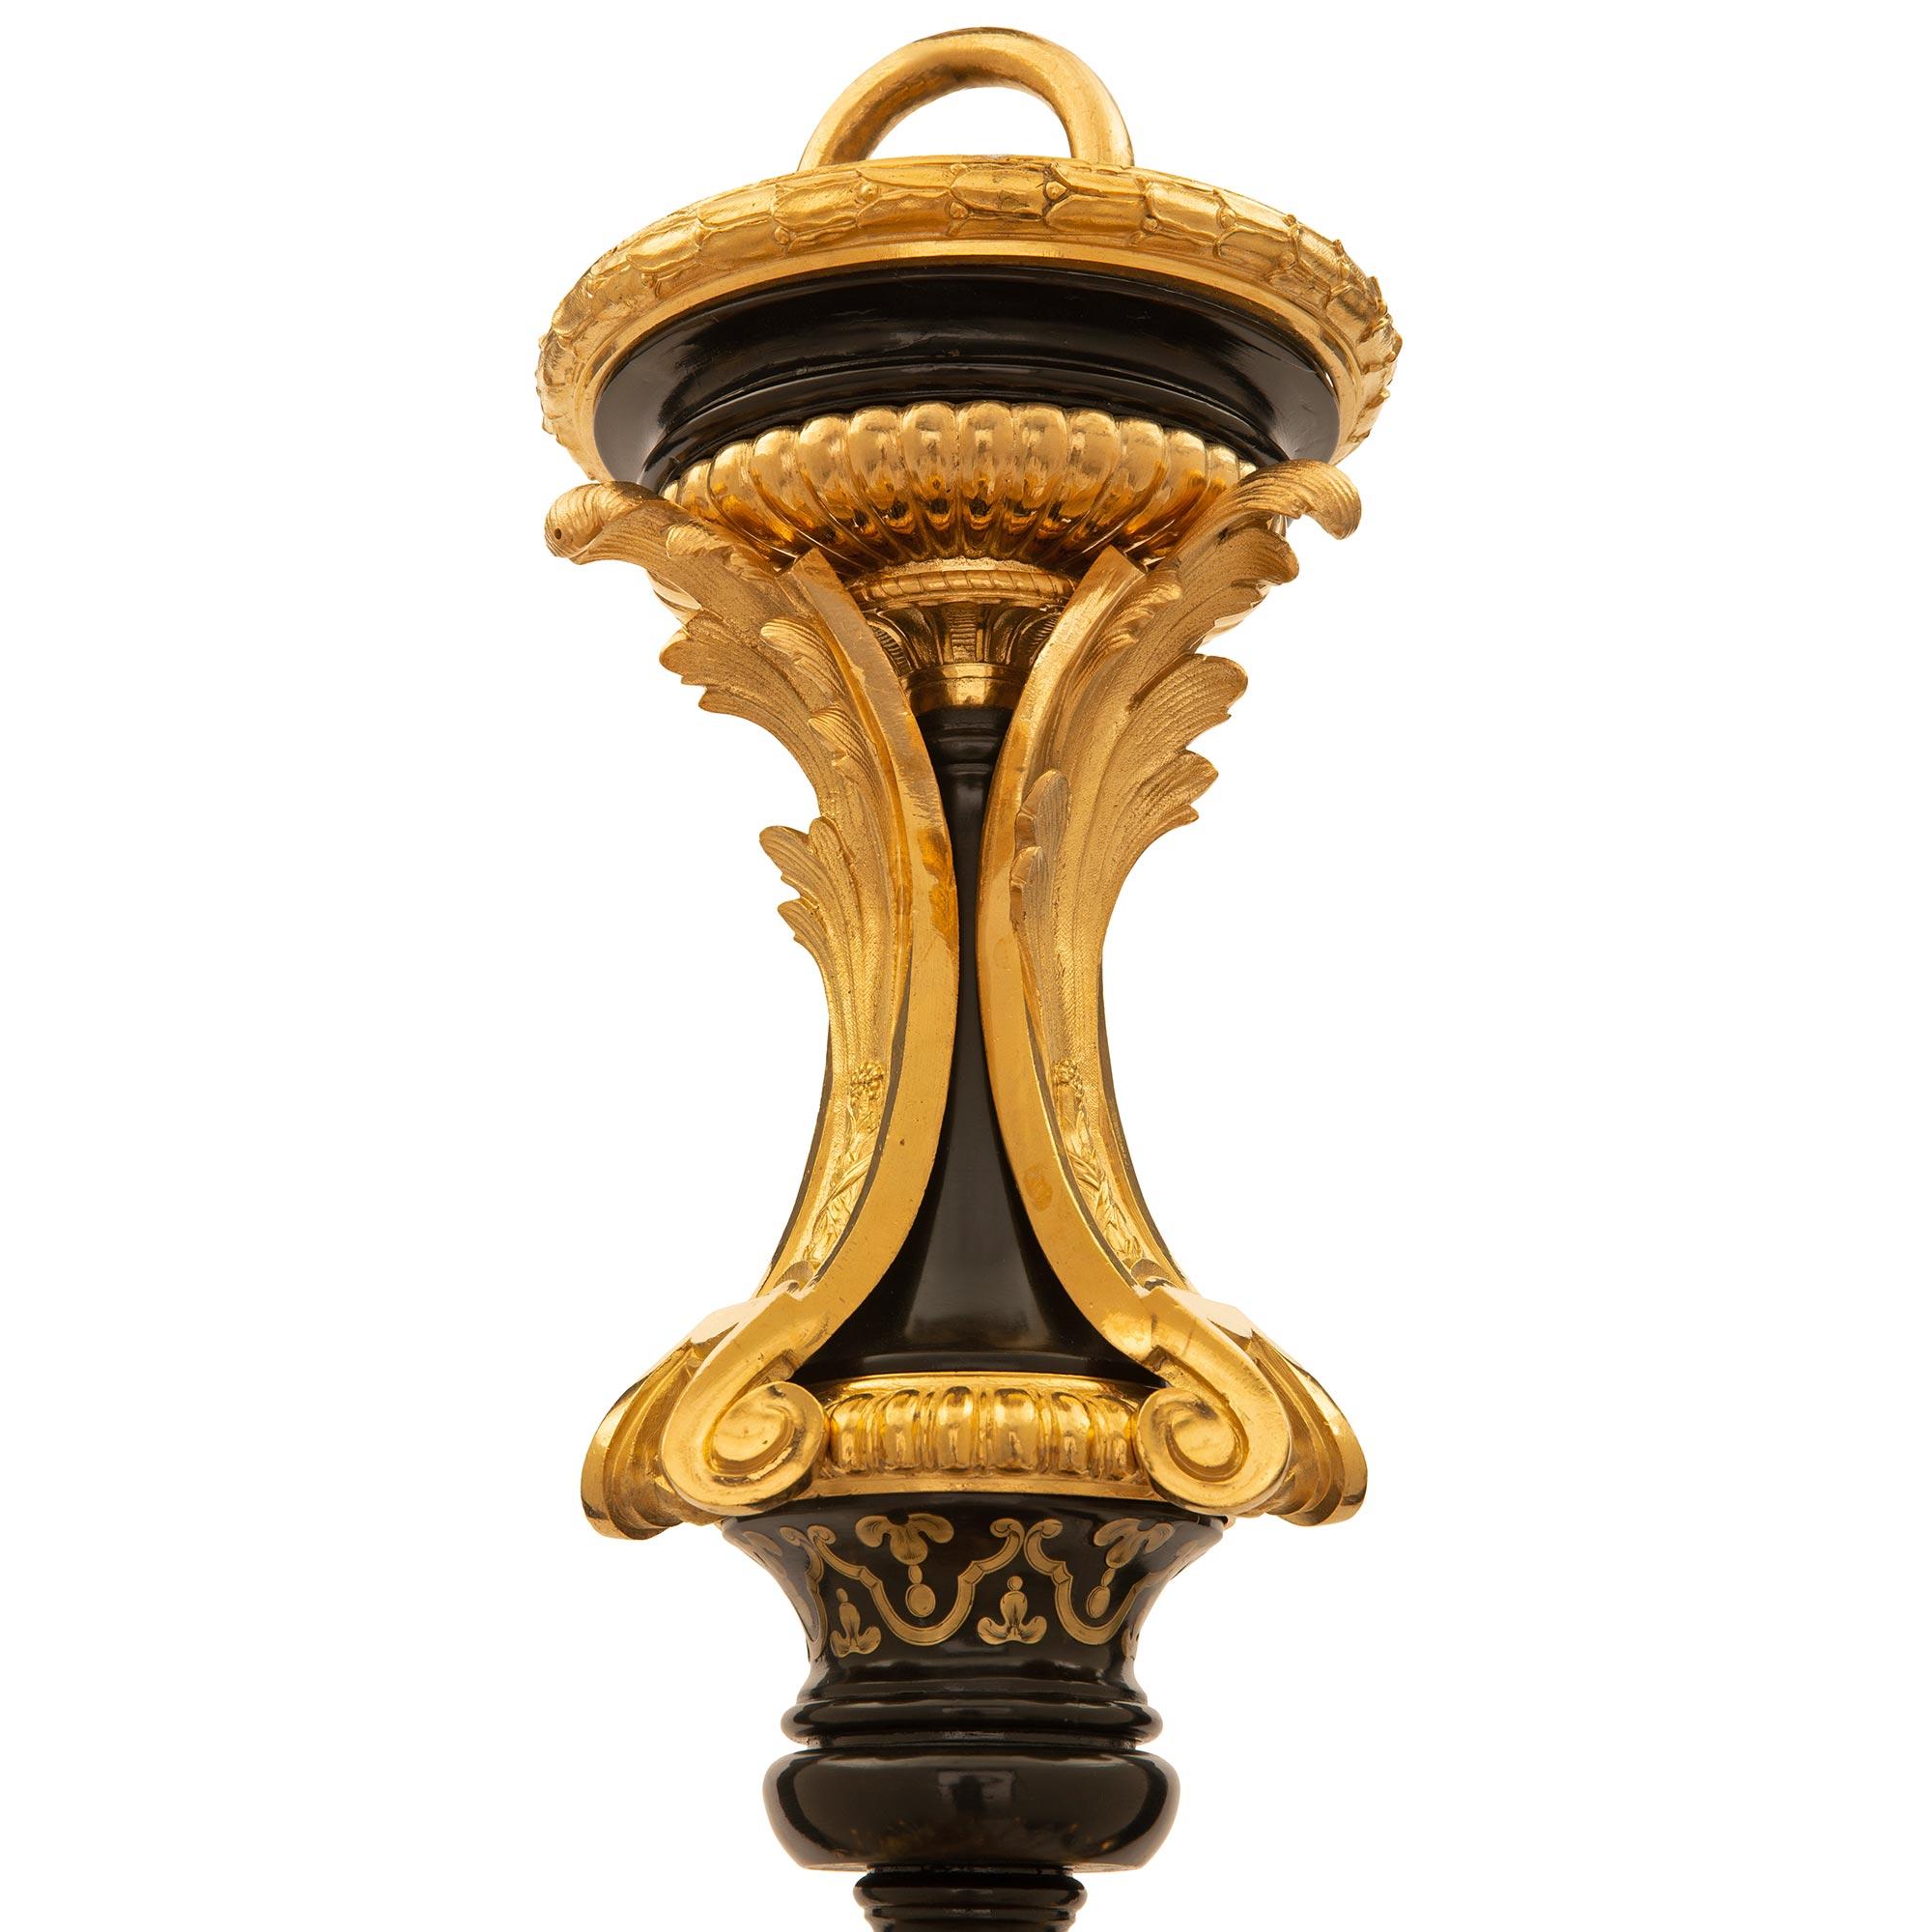 A stunning and extremely high quality French 19th century Louis XVI st. Ebony, ormolu Tortoiseshell and brass inlaid chandelier from the collection of Charles Aznavour. The twenty seven light chandelier is centered by a striking richly chased ormolu